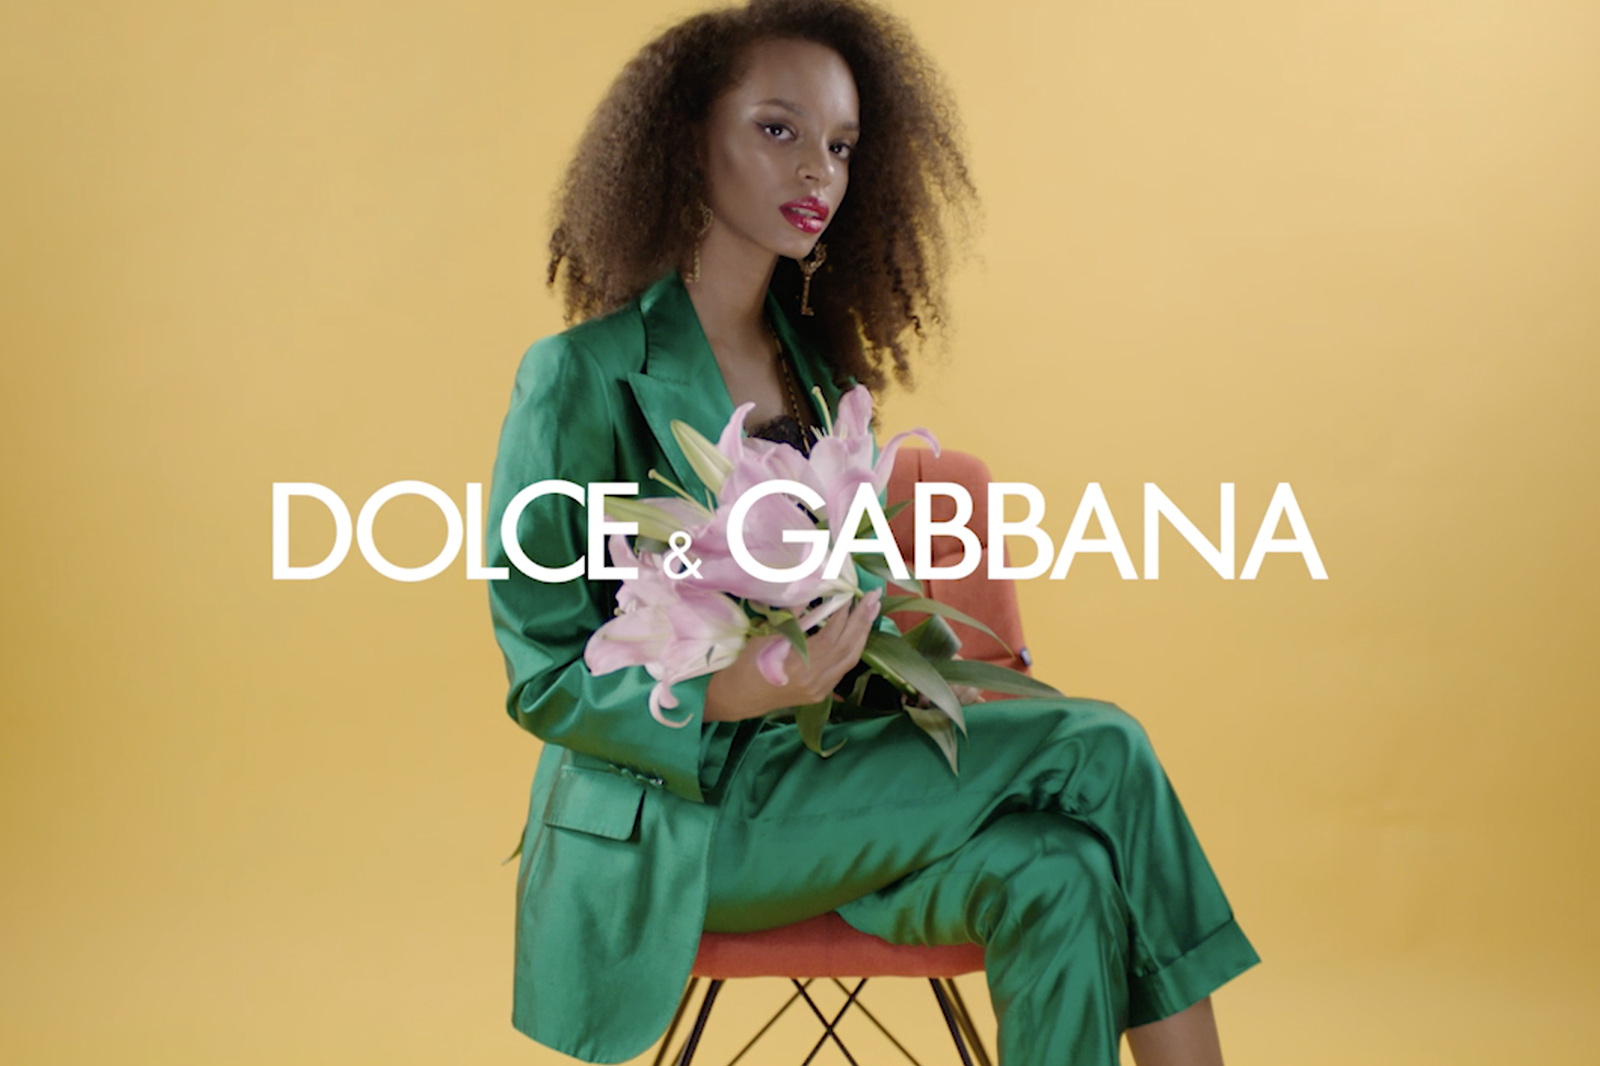 Dolce & Gabbana Commercial